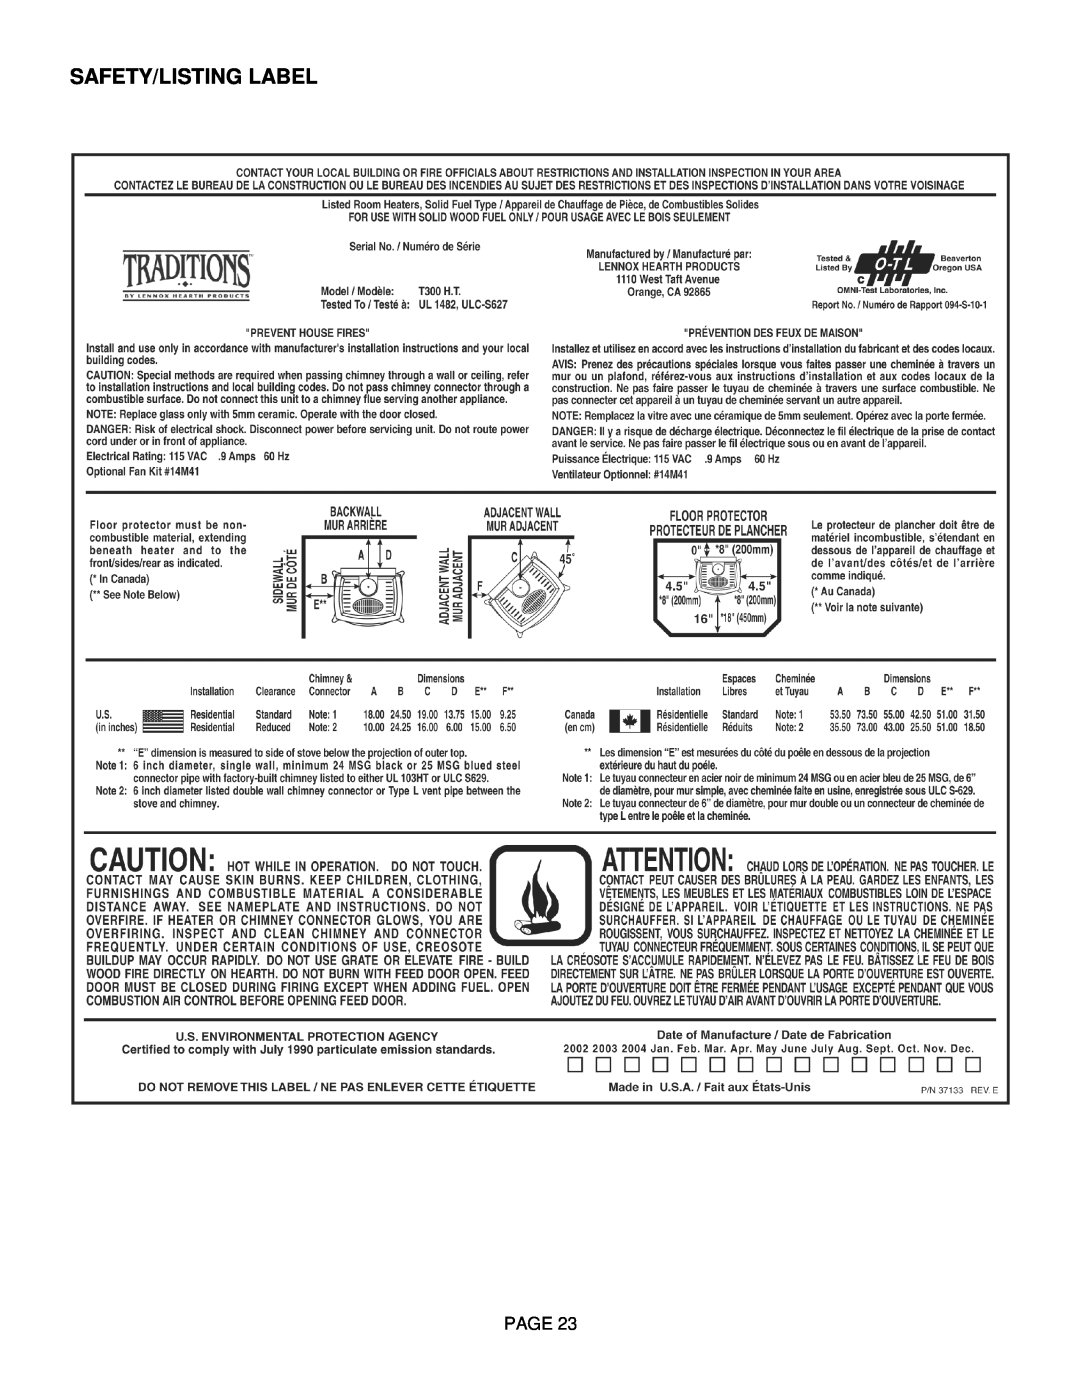 Lennox Hearth T300HT manual Safety/Listing Label, Page 